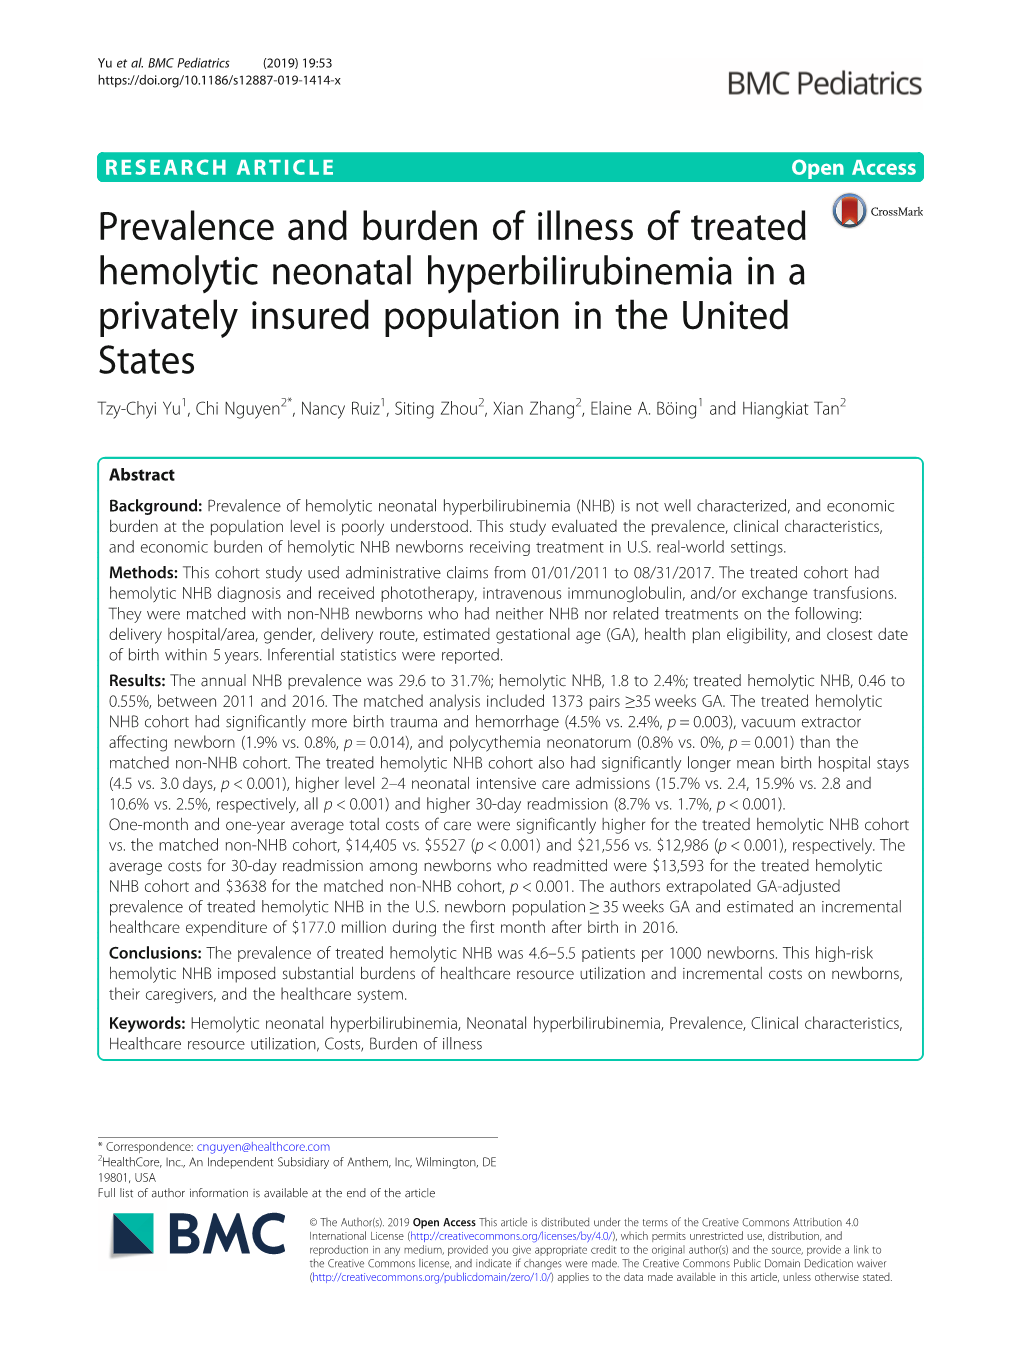 Prevalence and Burden of Illness of Treated Hemolytic Neonatal Hyperbilirubinemia in a Privately Insured Population in the Unite